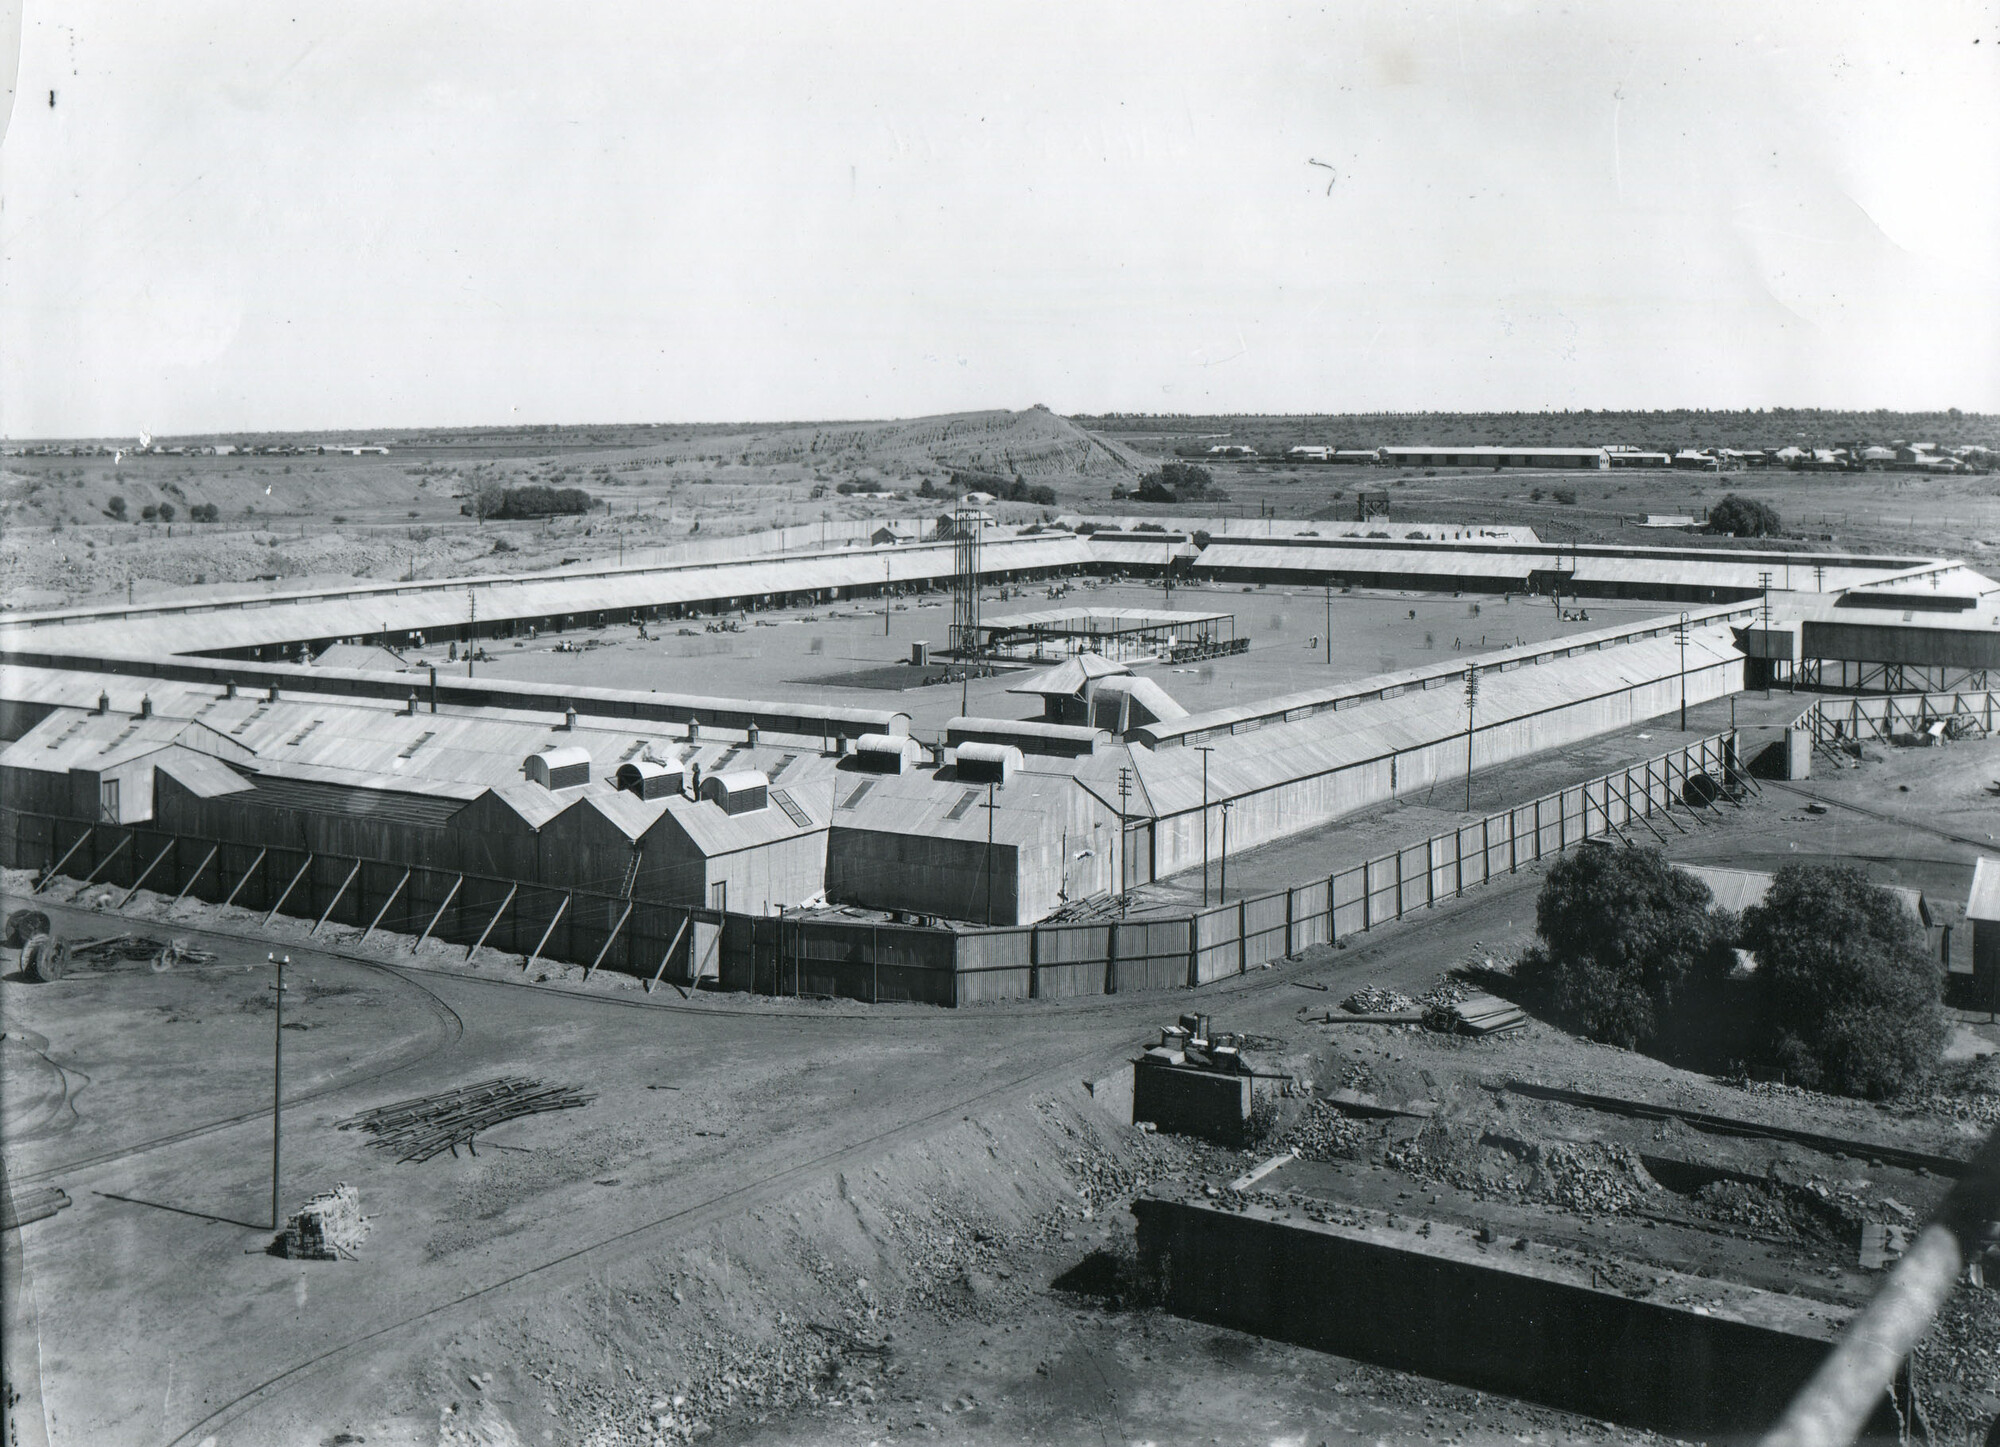 The Bultfontein compound in Kimberley, South Africa, was built in 1889 by De Beers and housed approximately 5,000 workers. Bultfontein mine compo